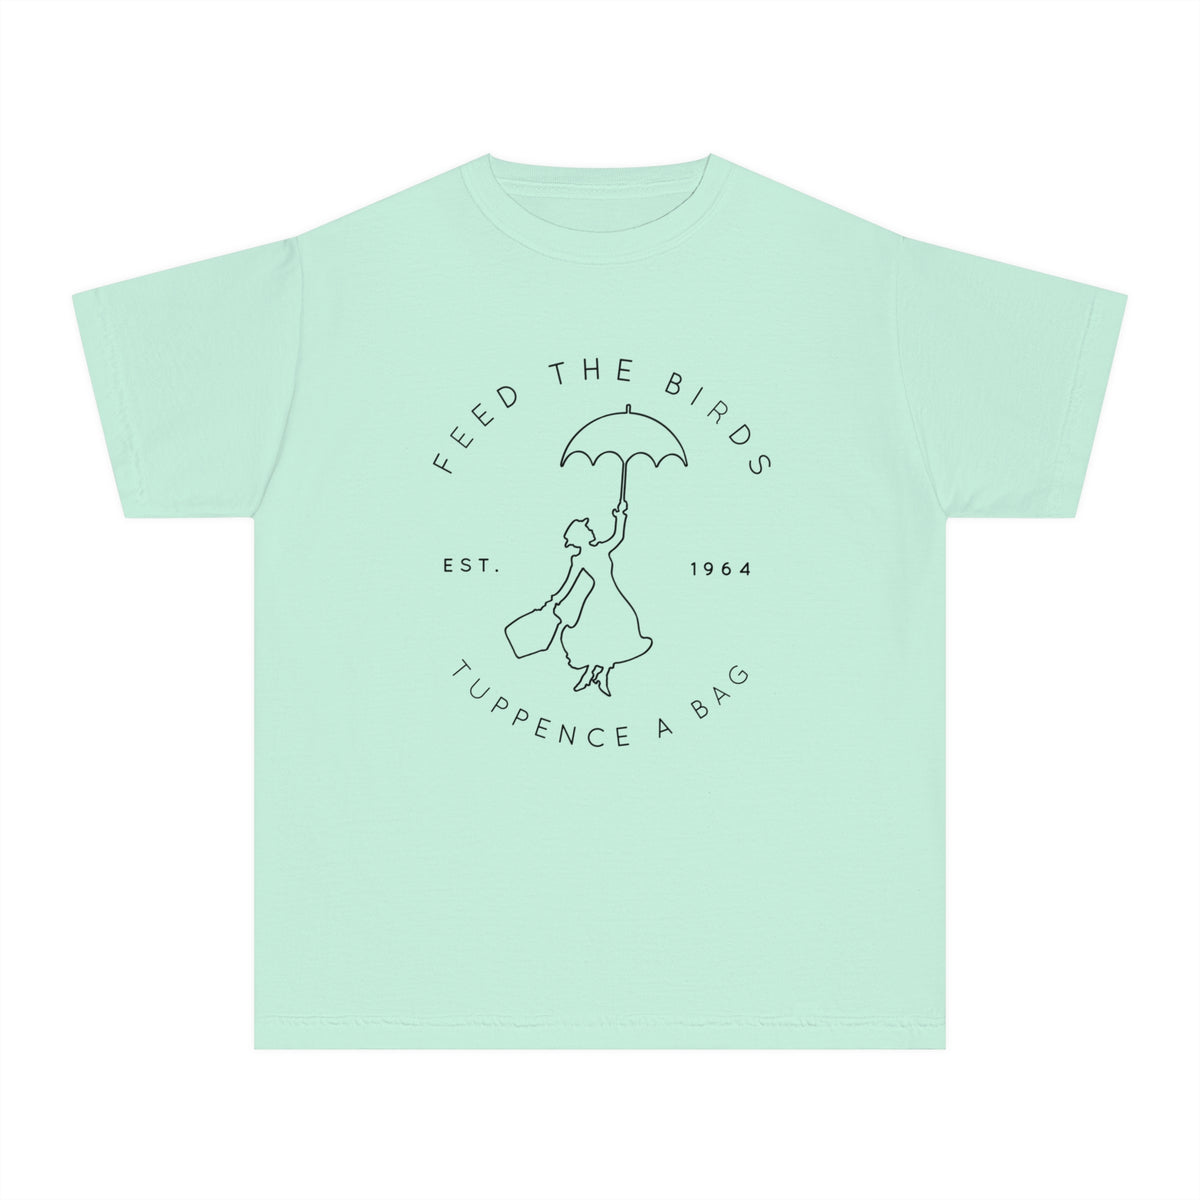 Feed the Birds Tuppence A Bag Comfort Colors Youth Midweight Tee